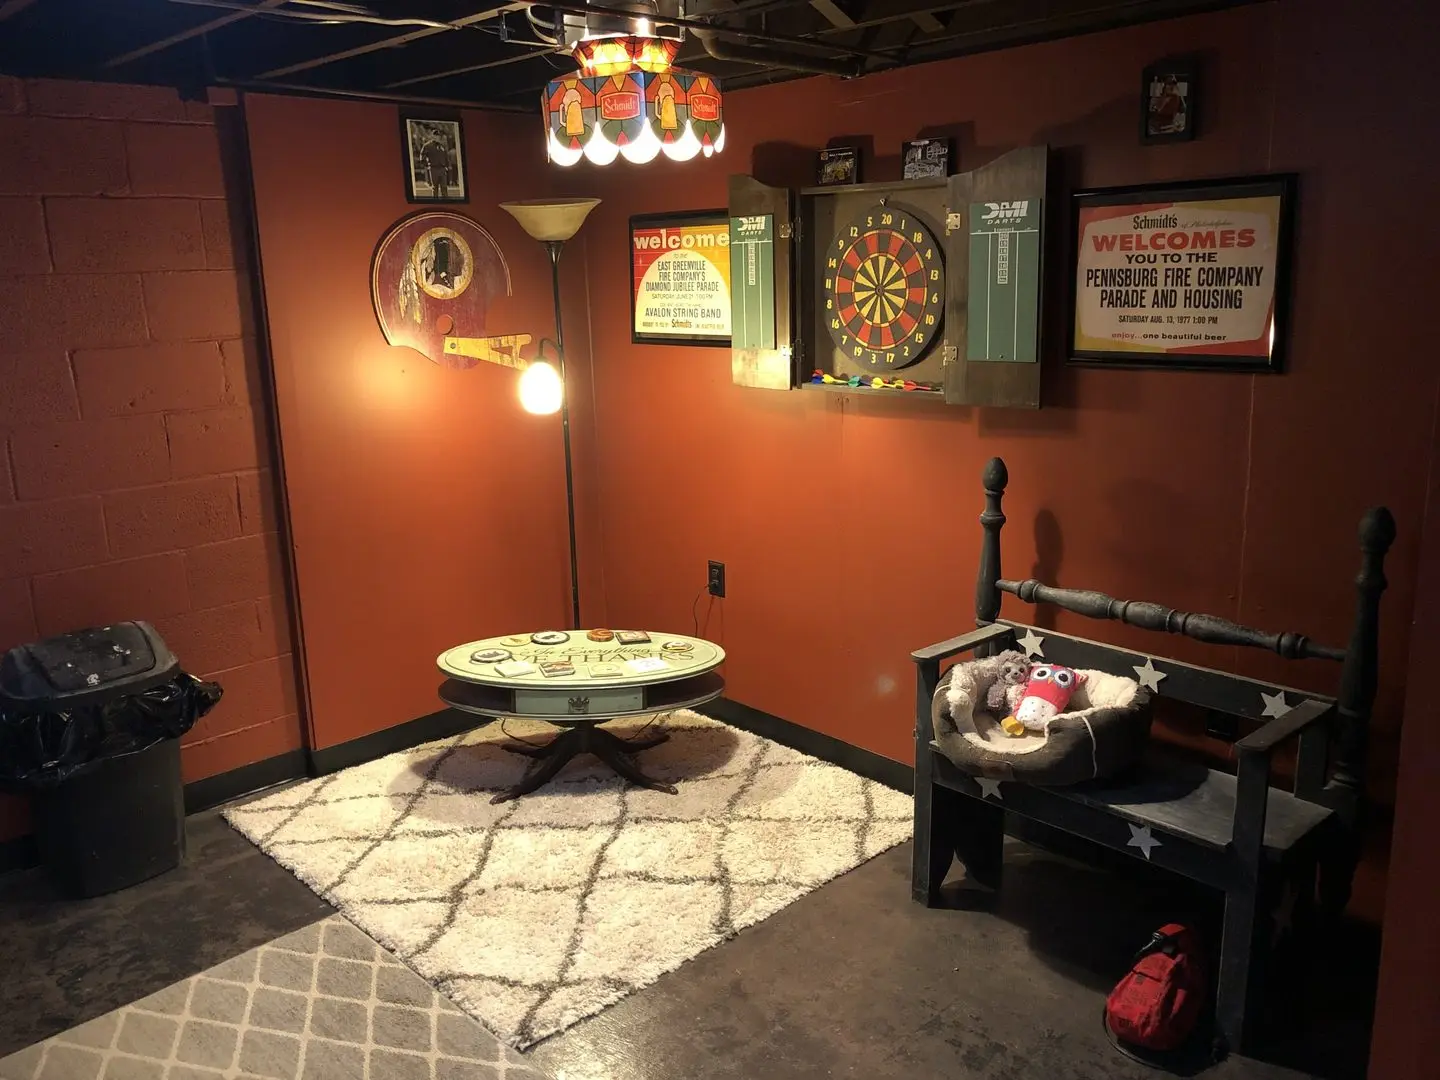 Newly revamped basement featuring a dart board and various fun posters on the walls